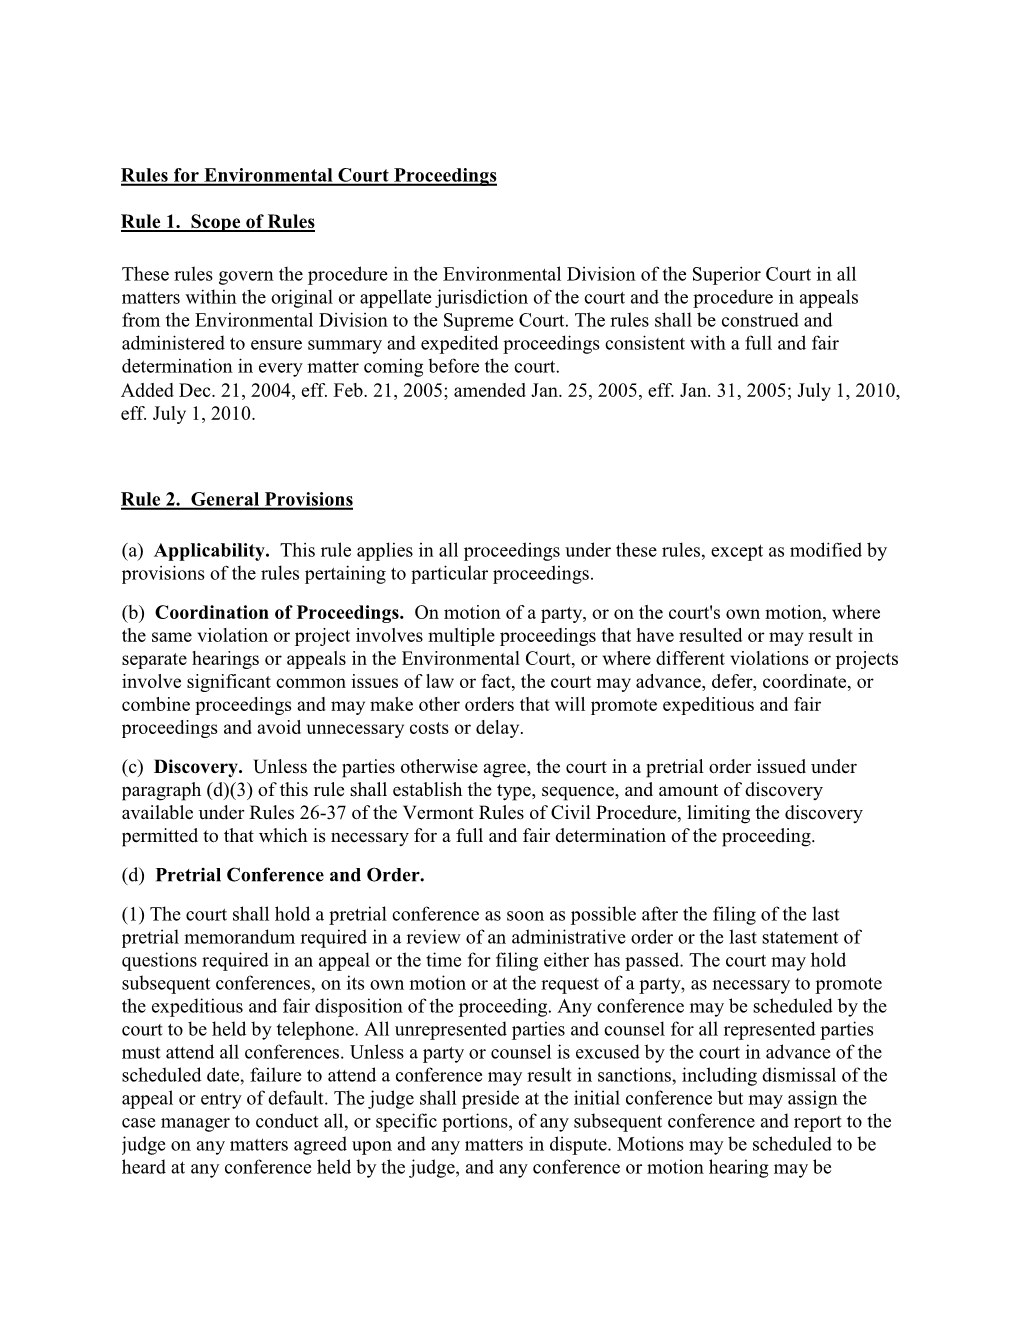 Rules for Environmental Court Proceedings Rule 1. Scope of Rules These Rules Govern the Procedure in the Environmental Division